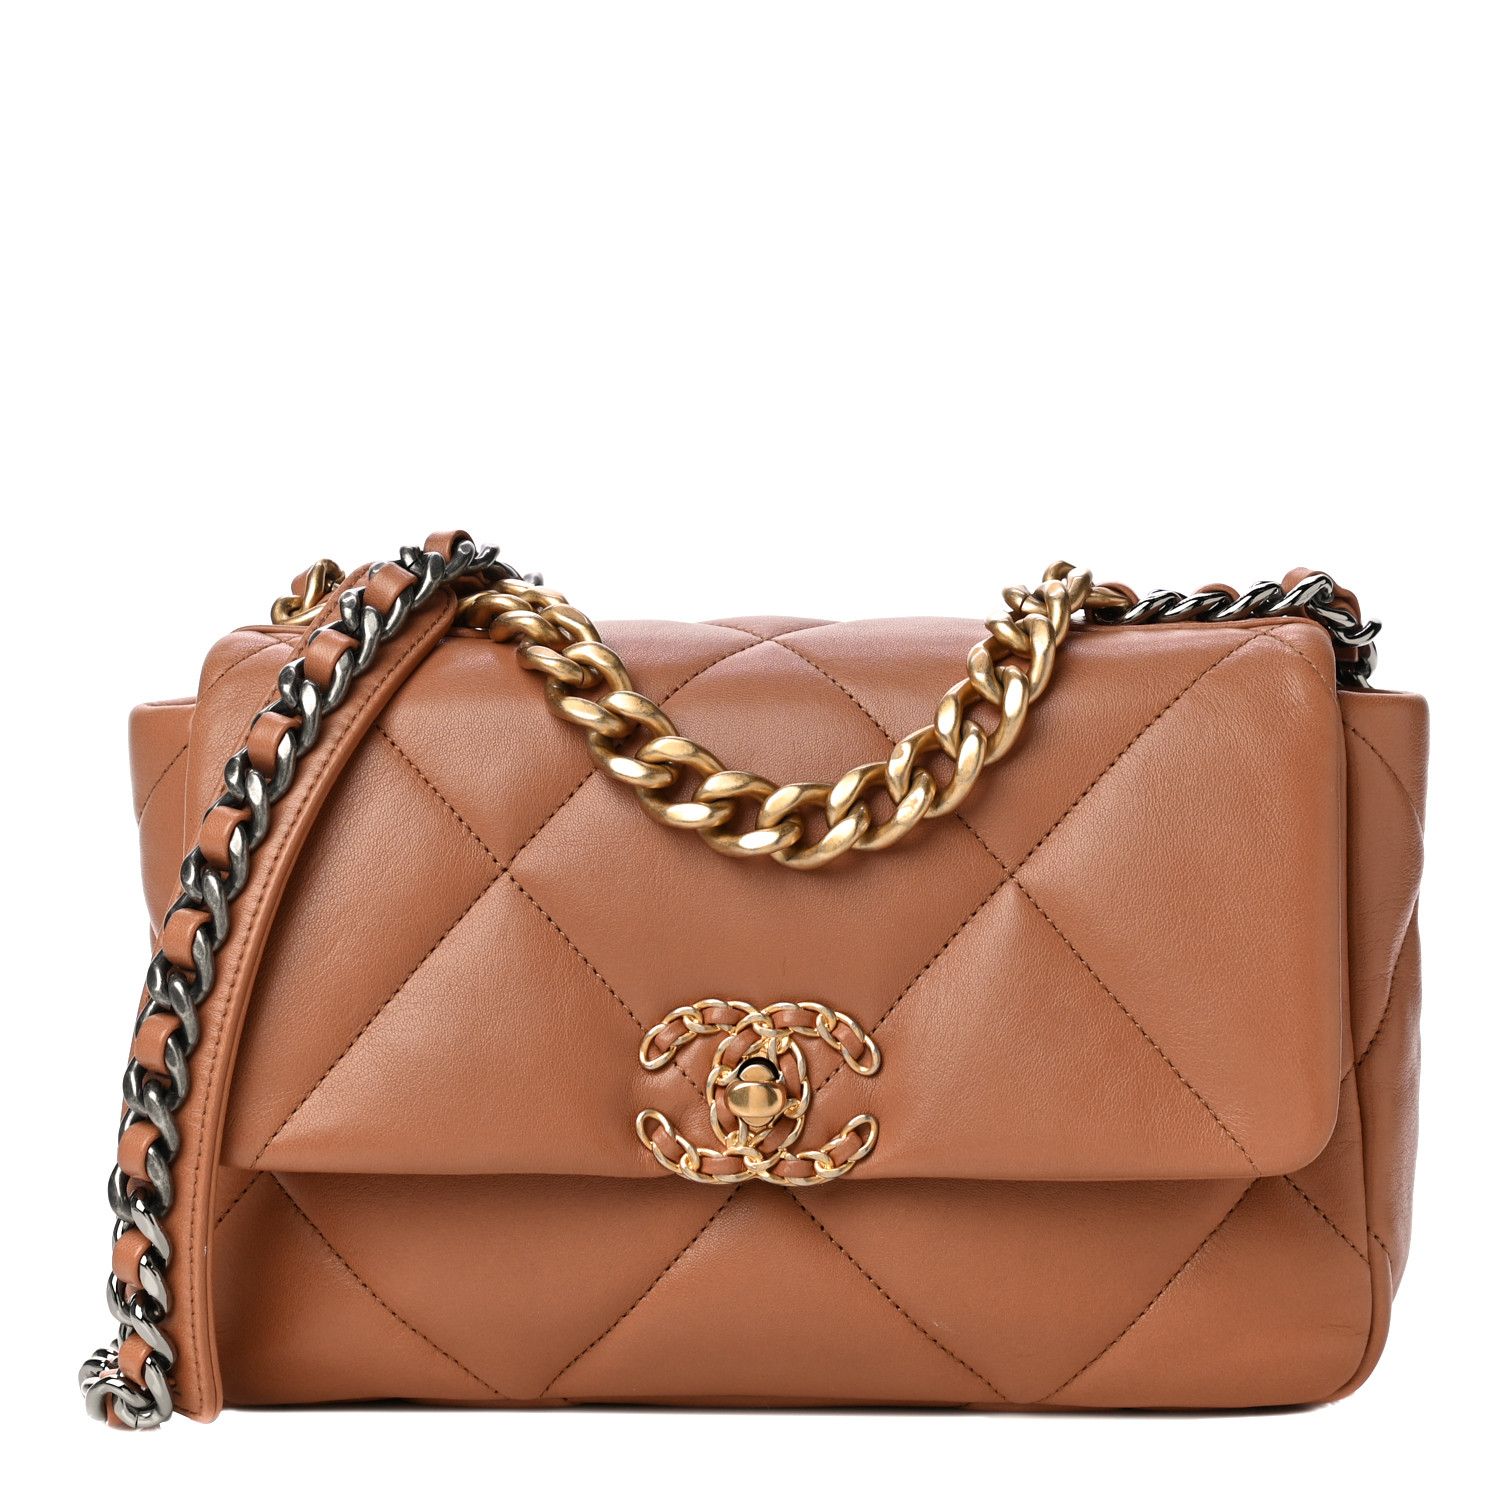 CHANEL

Lambskin Quilted Medium Chanel 19 Flap Brown | Fashionphile